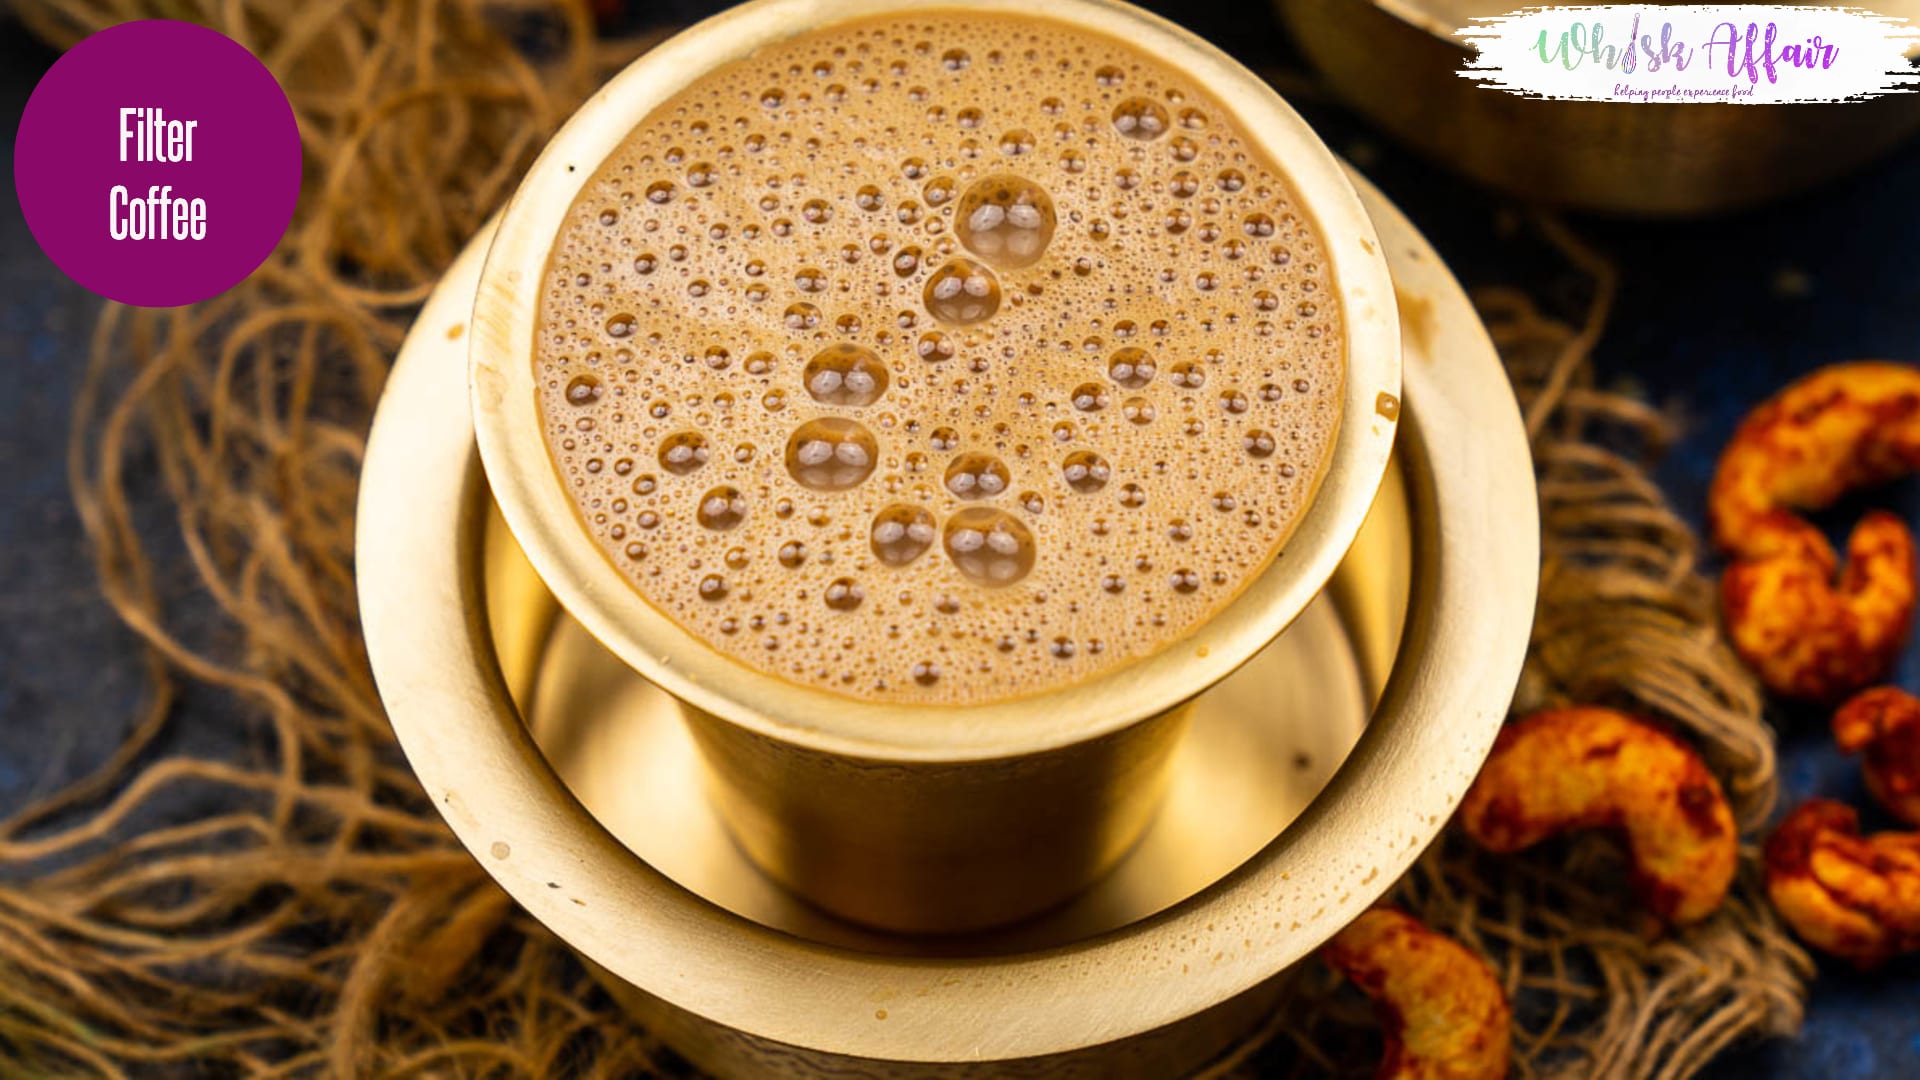 Filter Coffee / Traditional South Indian Filter Coffee